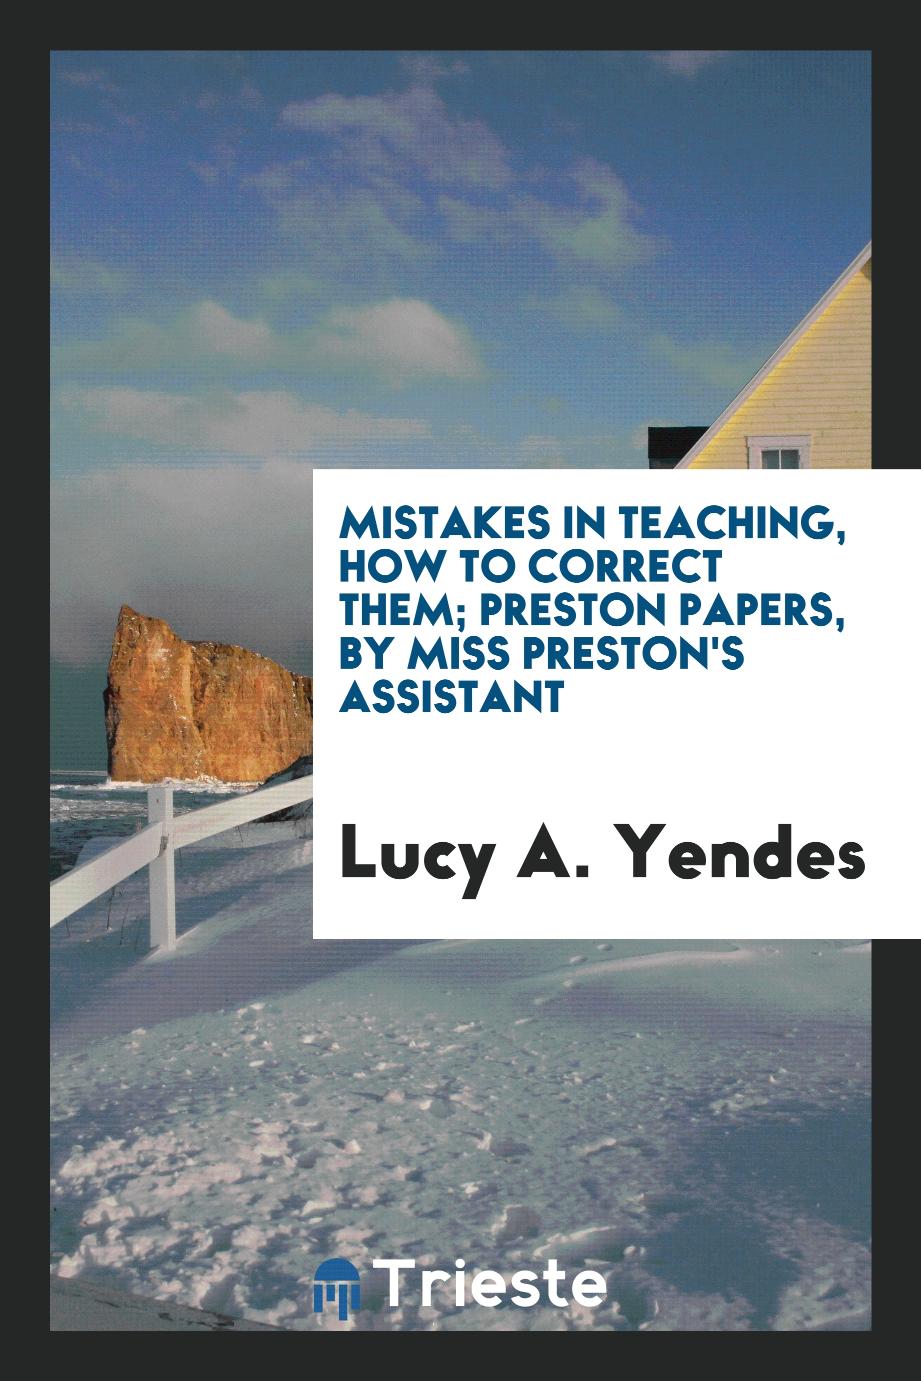 Mistakes in teaching, how to correct them; Preston papers, by Miss Preston's assistant